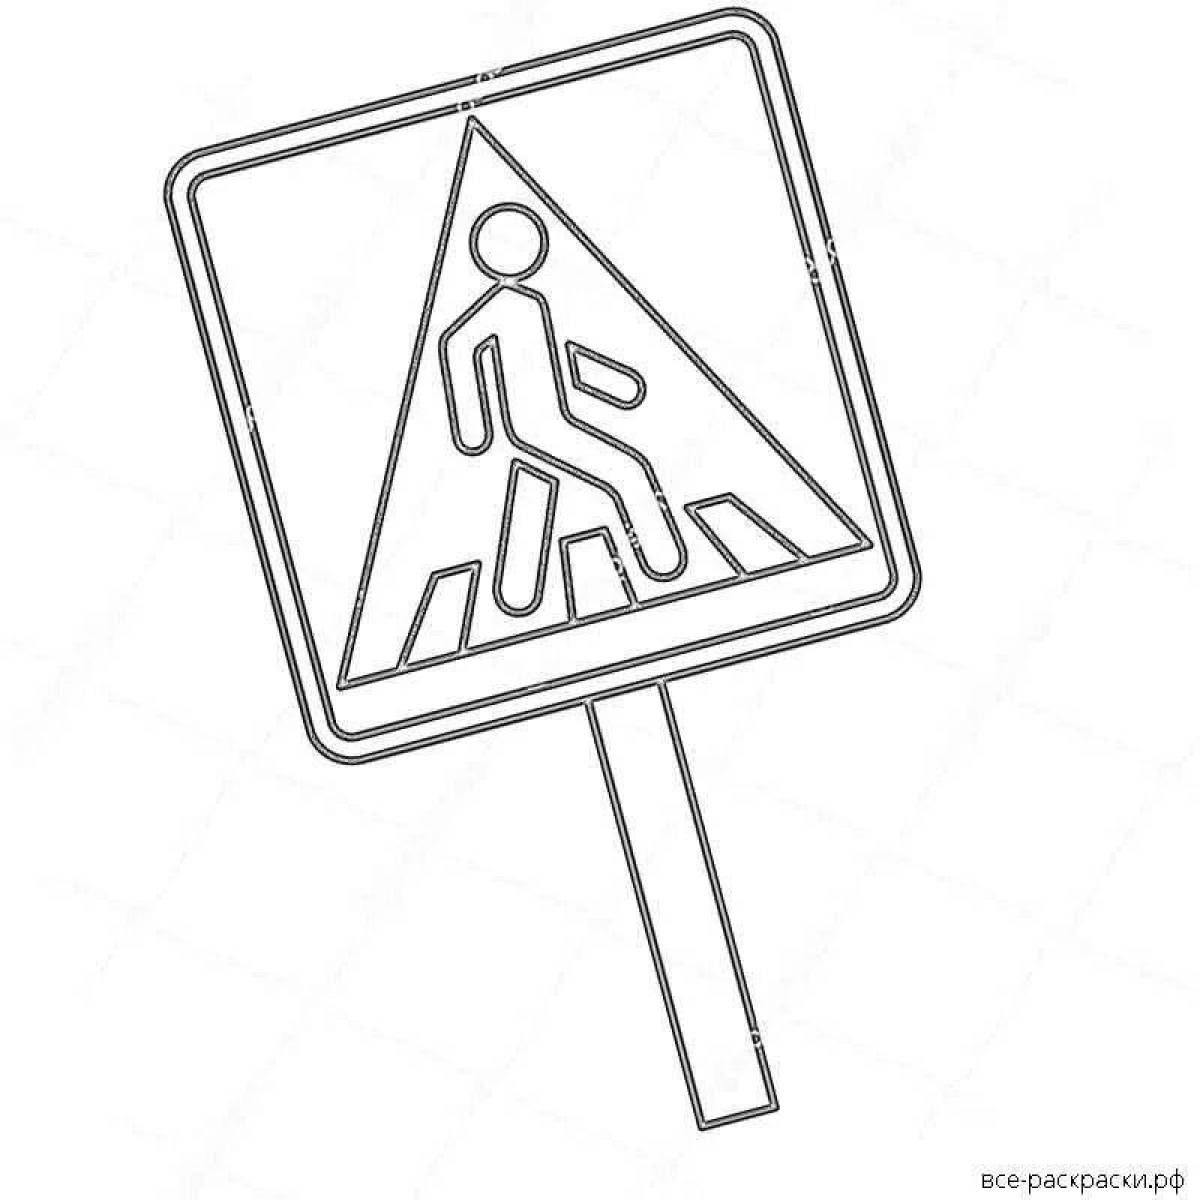 Coloring page cheerful pedestrian crossing road sign